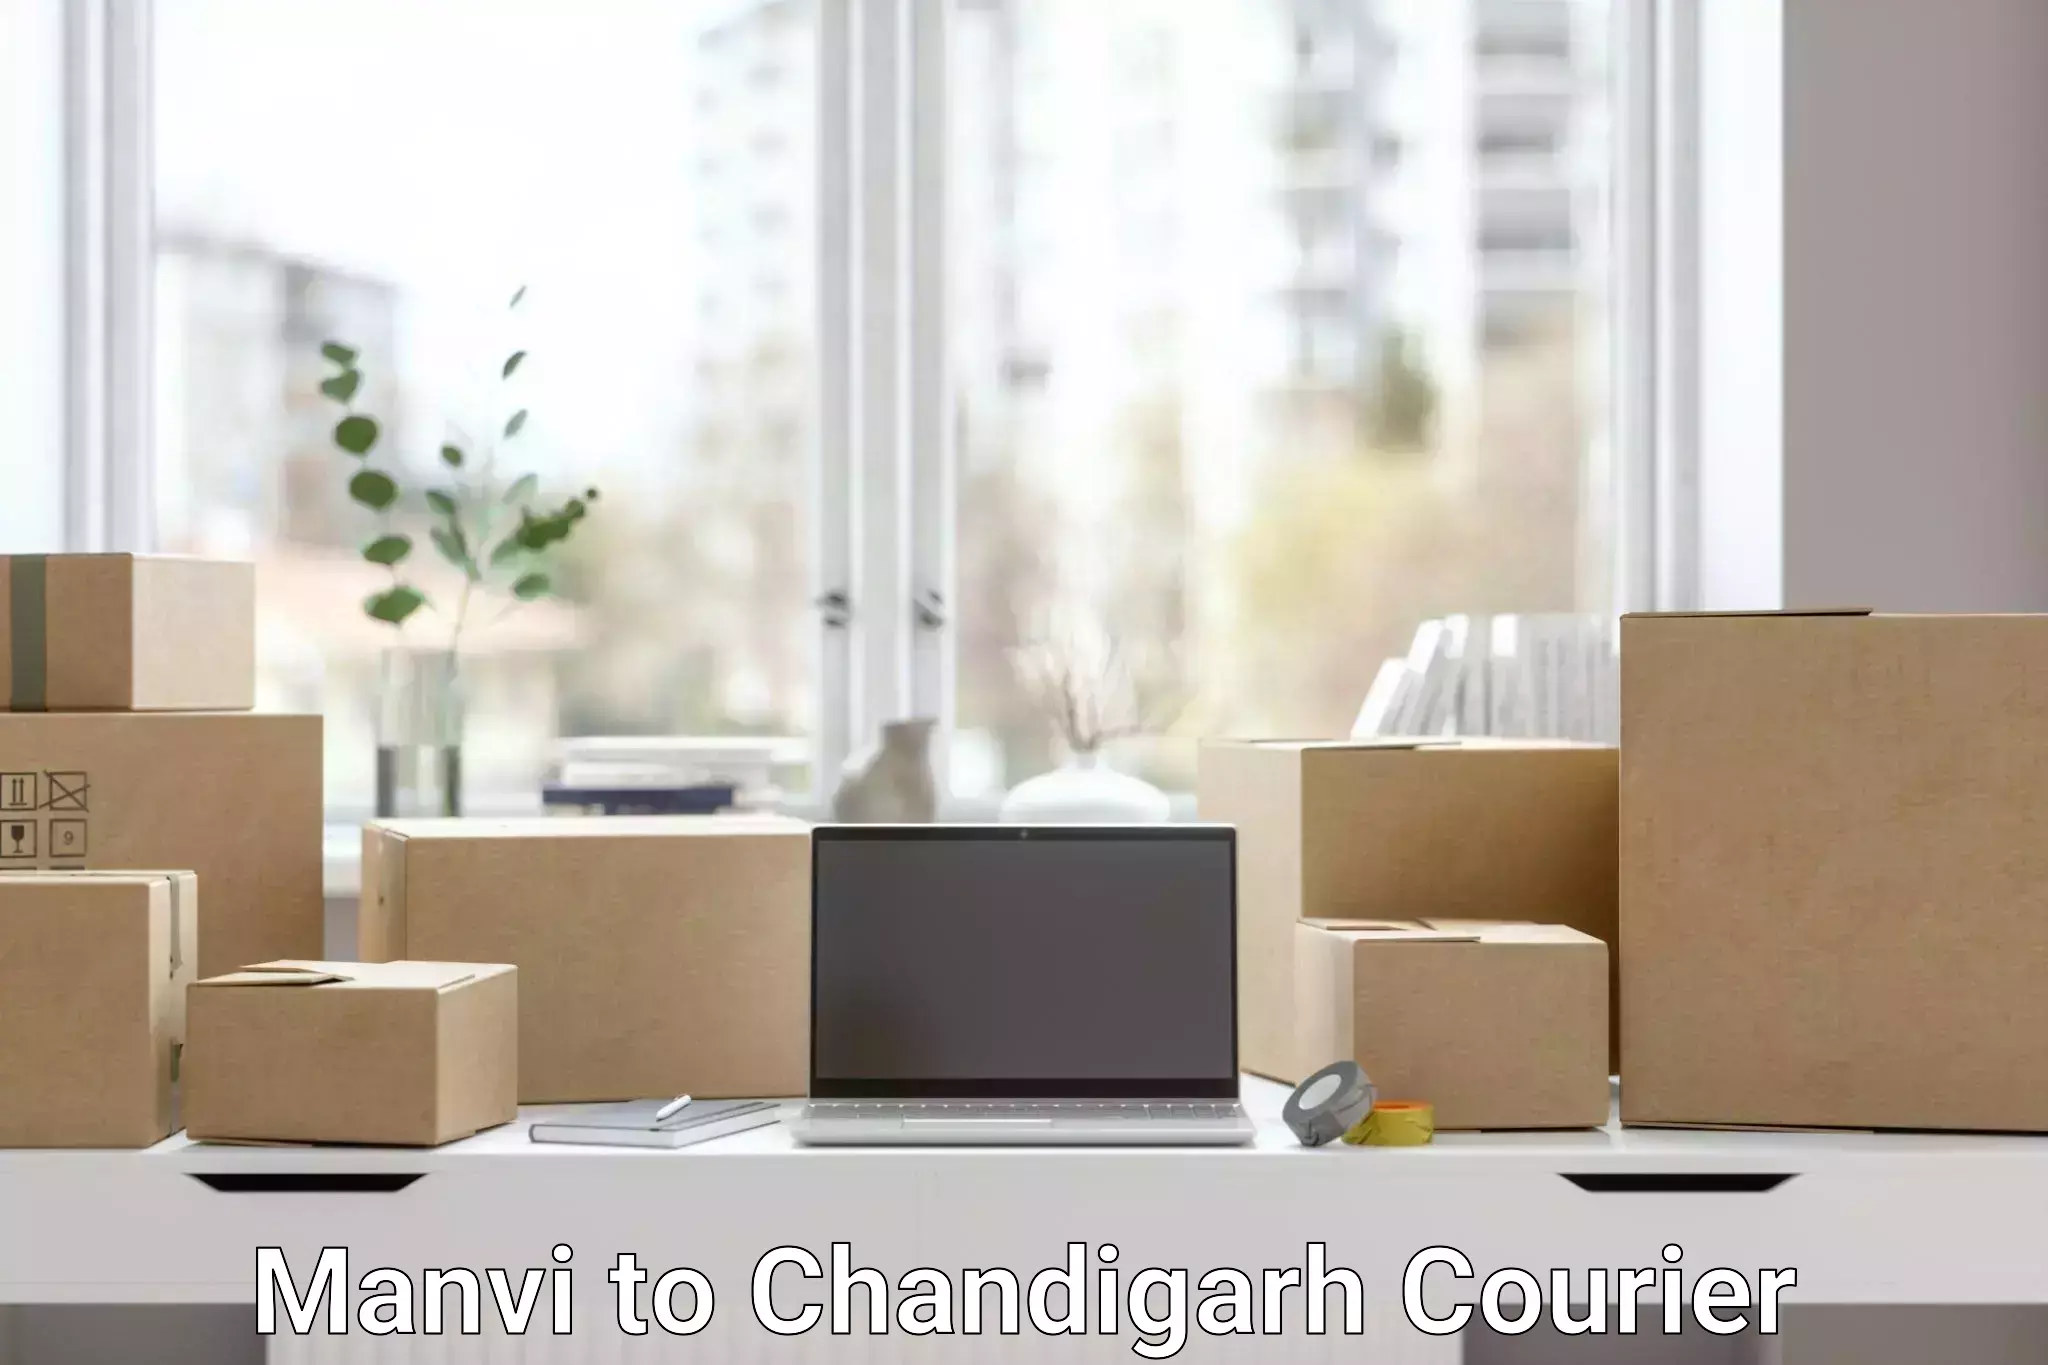 Same-day delivery solutions Manvi to Chandigarh